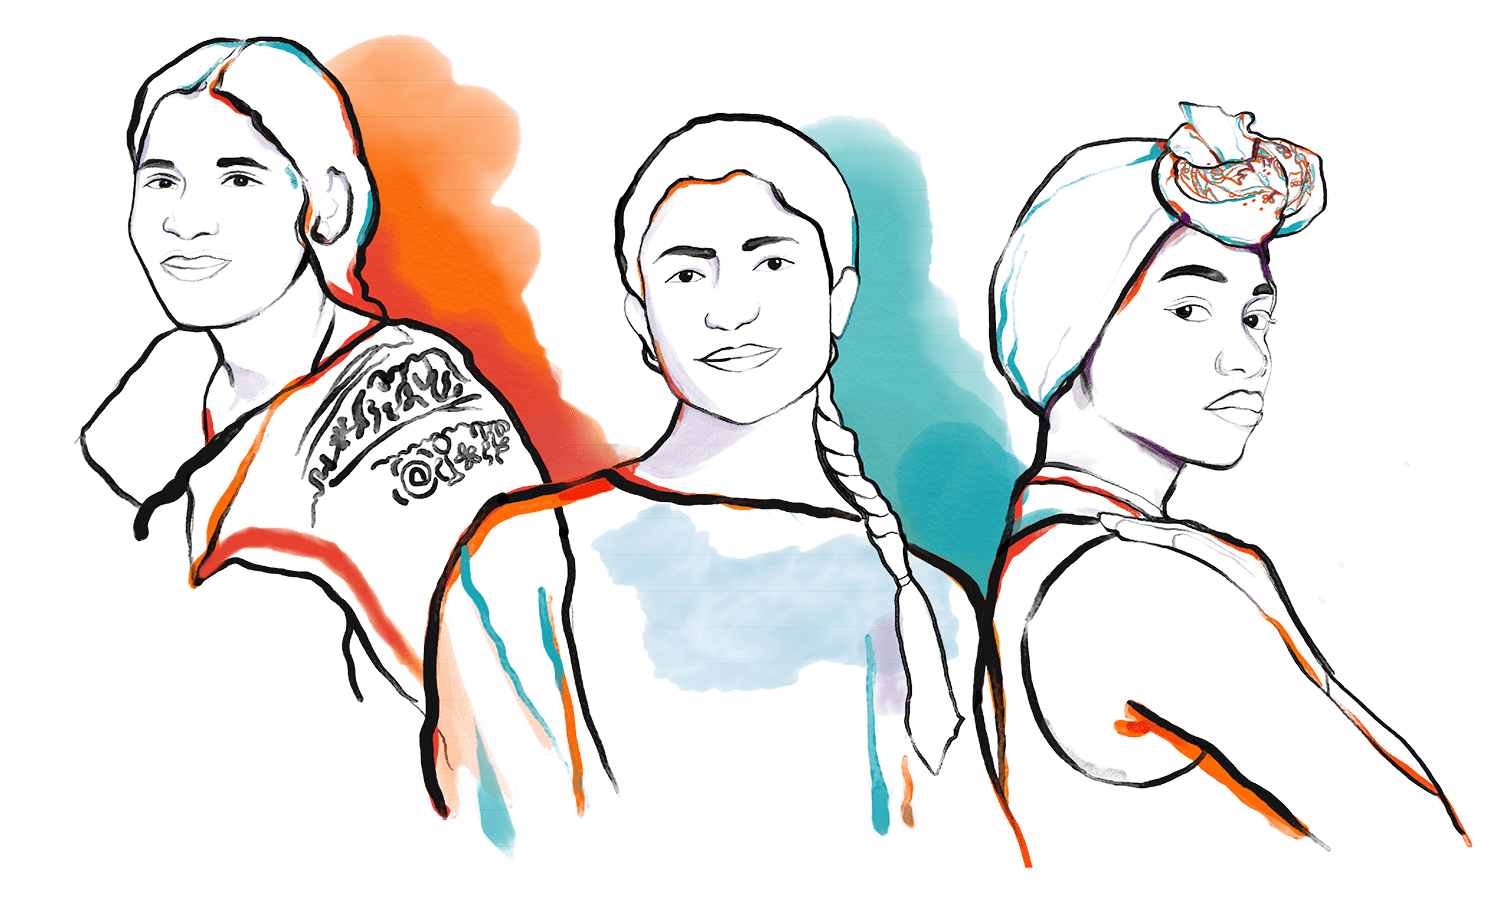 Illustration of women with diverse clothing, hairstyles, suggesting different cultures